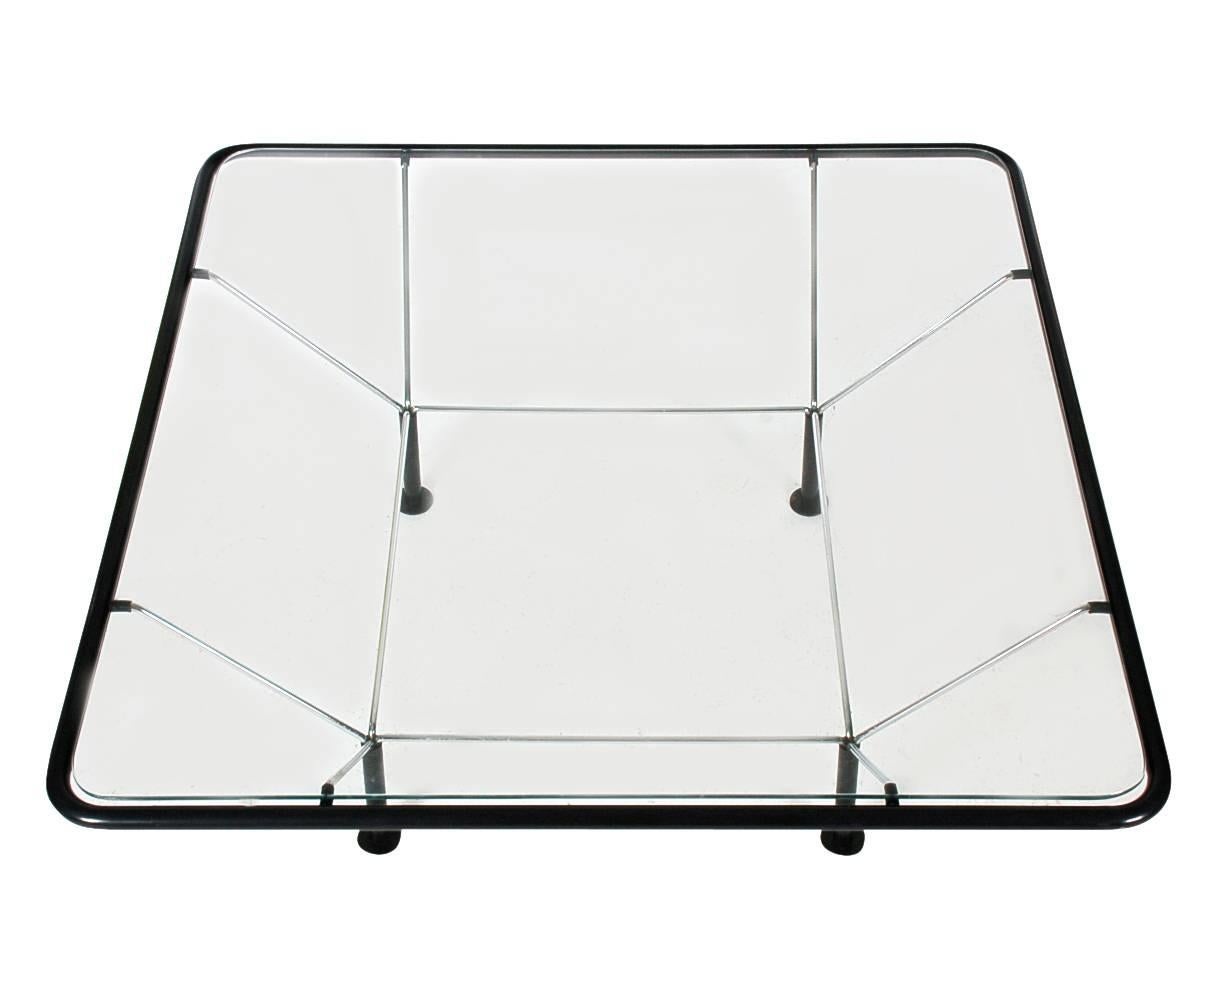 An architectual looking cocktail table very reminiscent of Paolo Piva's Alanda table. It features steel wire construction with black tubular plastic and inlayed clear glass, circa 1980s.